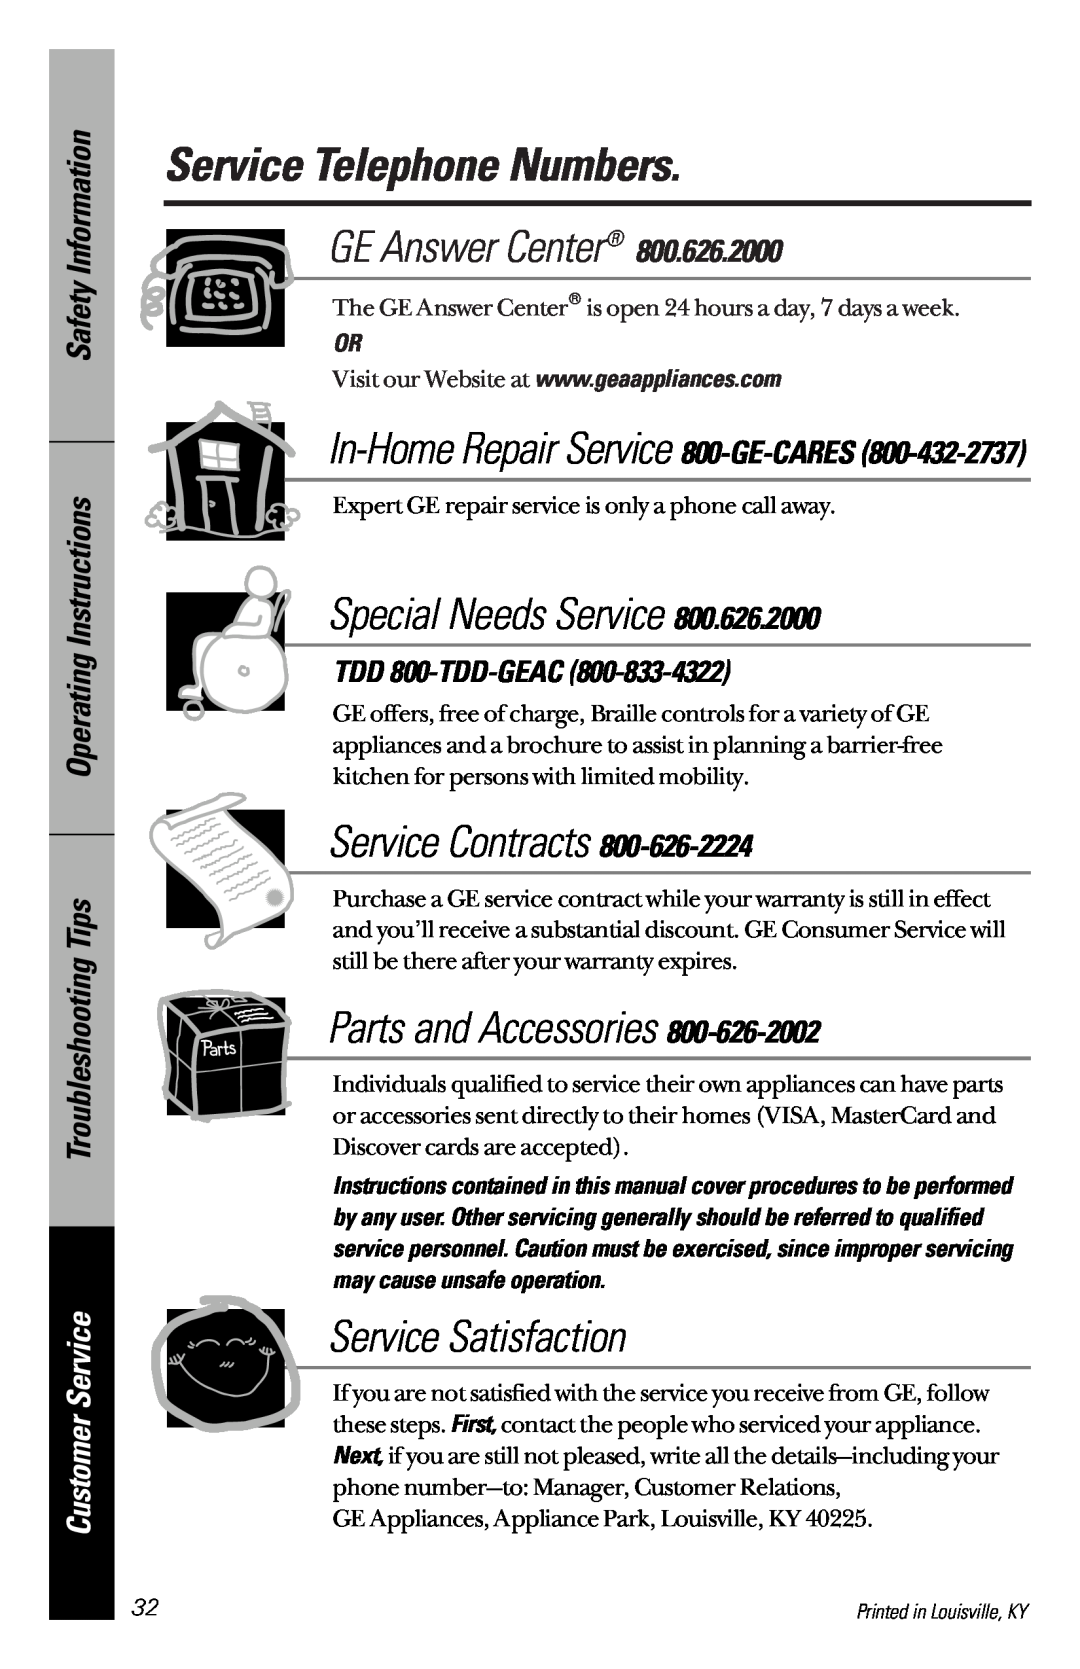 Hotpoint HDA2200 Service Telephone Numbers, In-HomeRepair Service 800-GE-CARES, TDD 800-TDD-GEAC, GE Answer Center 